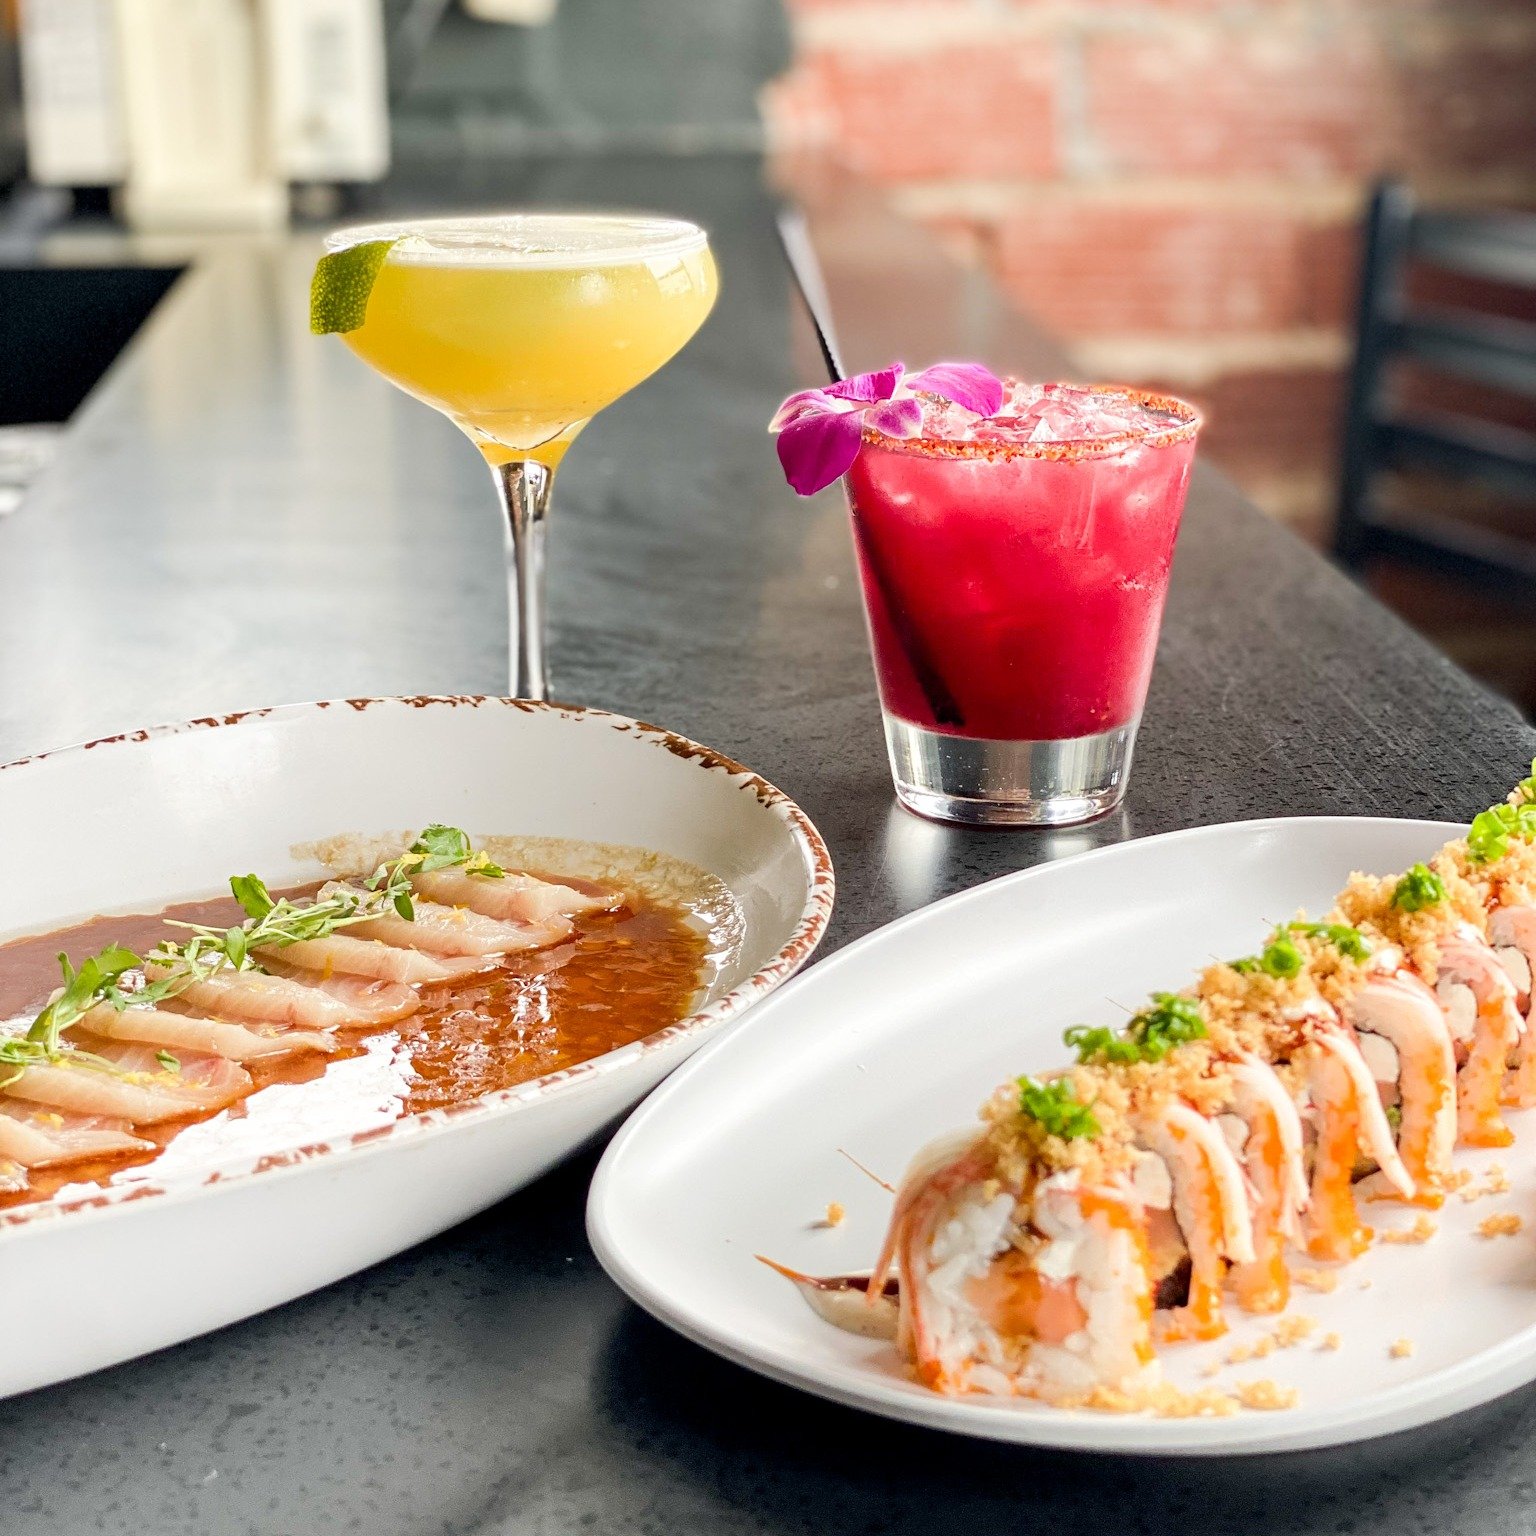 Weekly drop is live! Enjoy the rays after the rain on our patio or indoor dining room. 

📸 here are...

🛸 UFO Roll: crab cake, cream cheese, jalape&ntilde;o, and smoked salmon rolled in masago. topped with crab stick, lemon-lime aioli, eel sauce, s